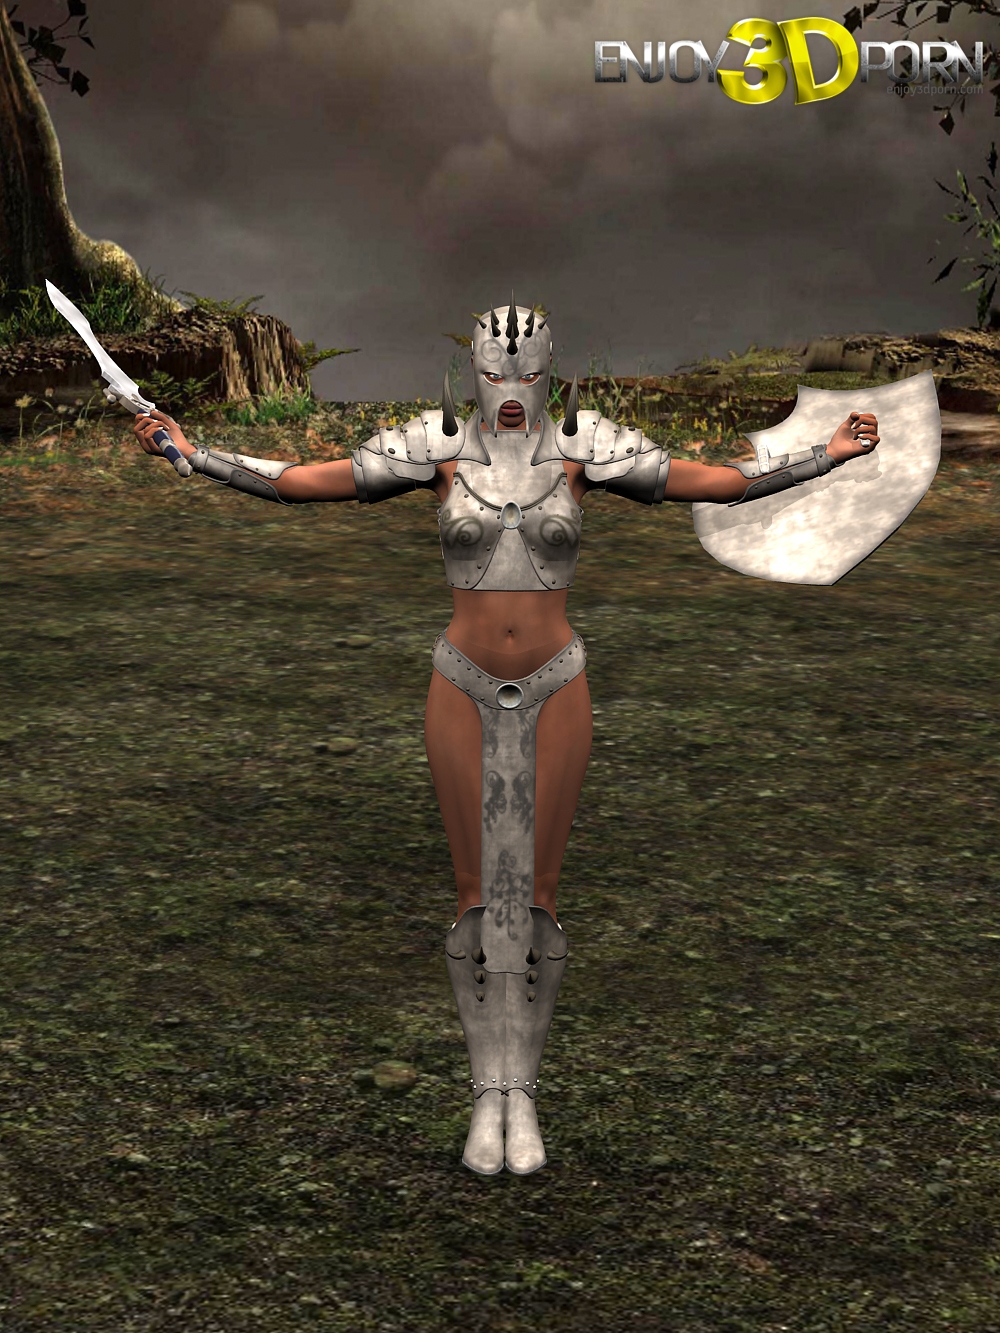 Medieval Knight Sheds Her Armor And Reveals Her Sexy Body